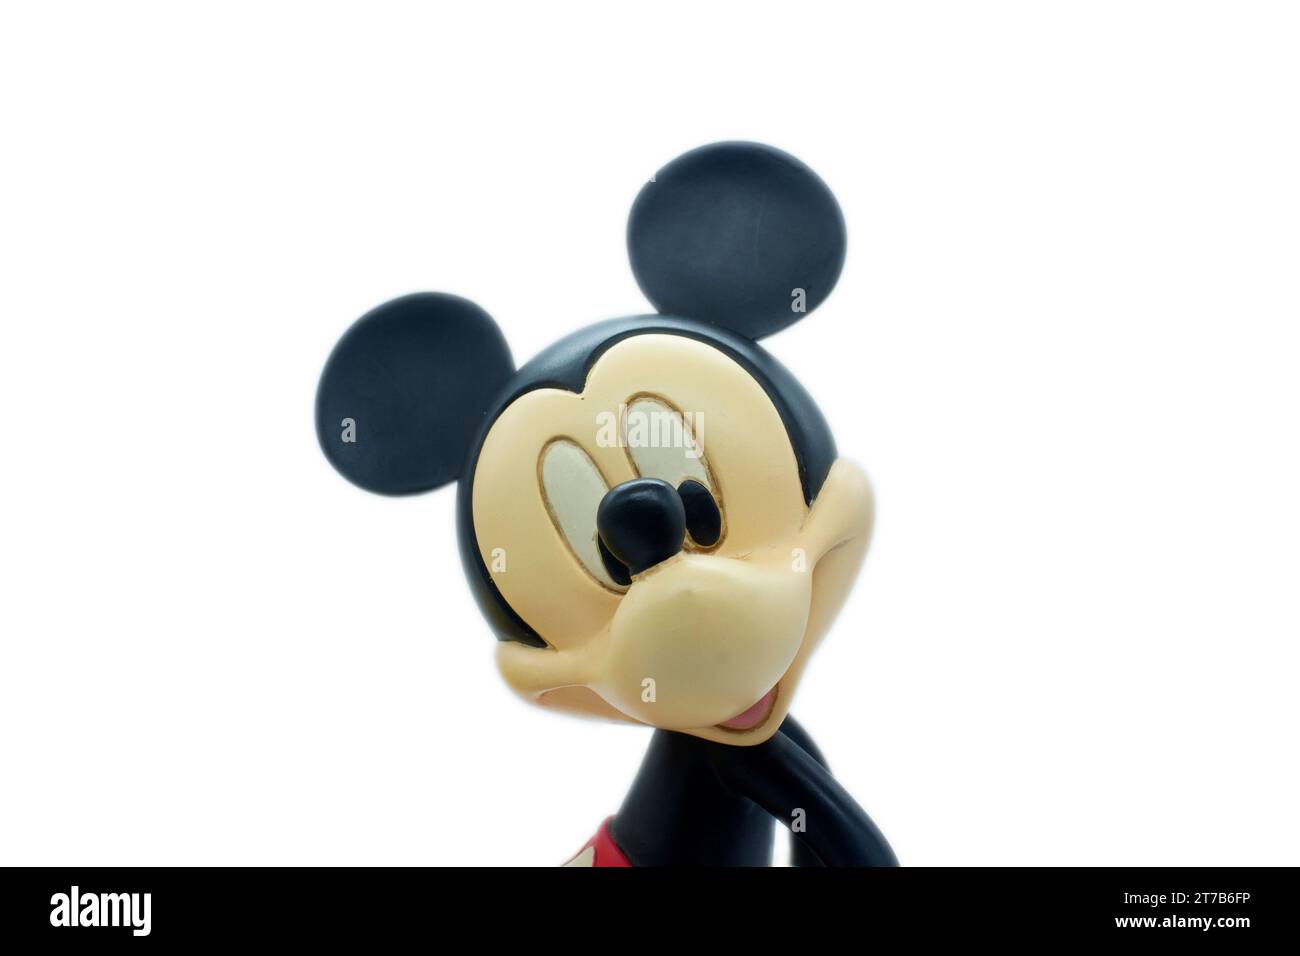 Studio image of Mickey mouse on a white isolated background. Stock Photo